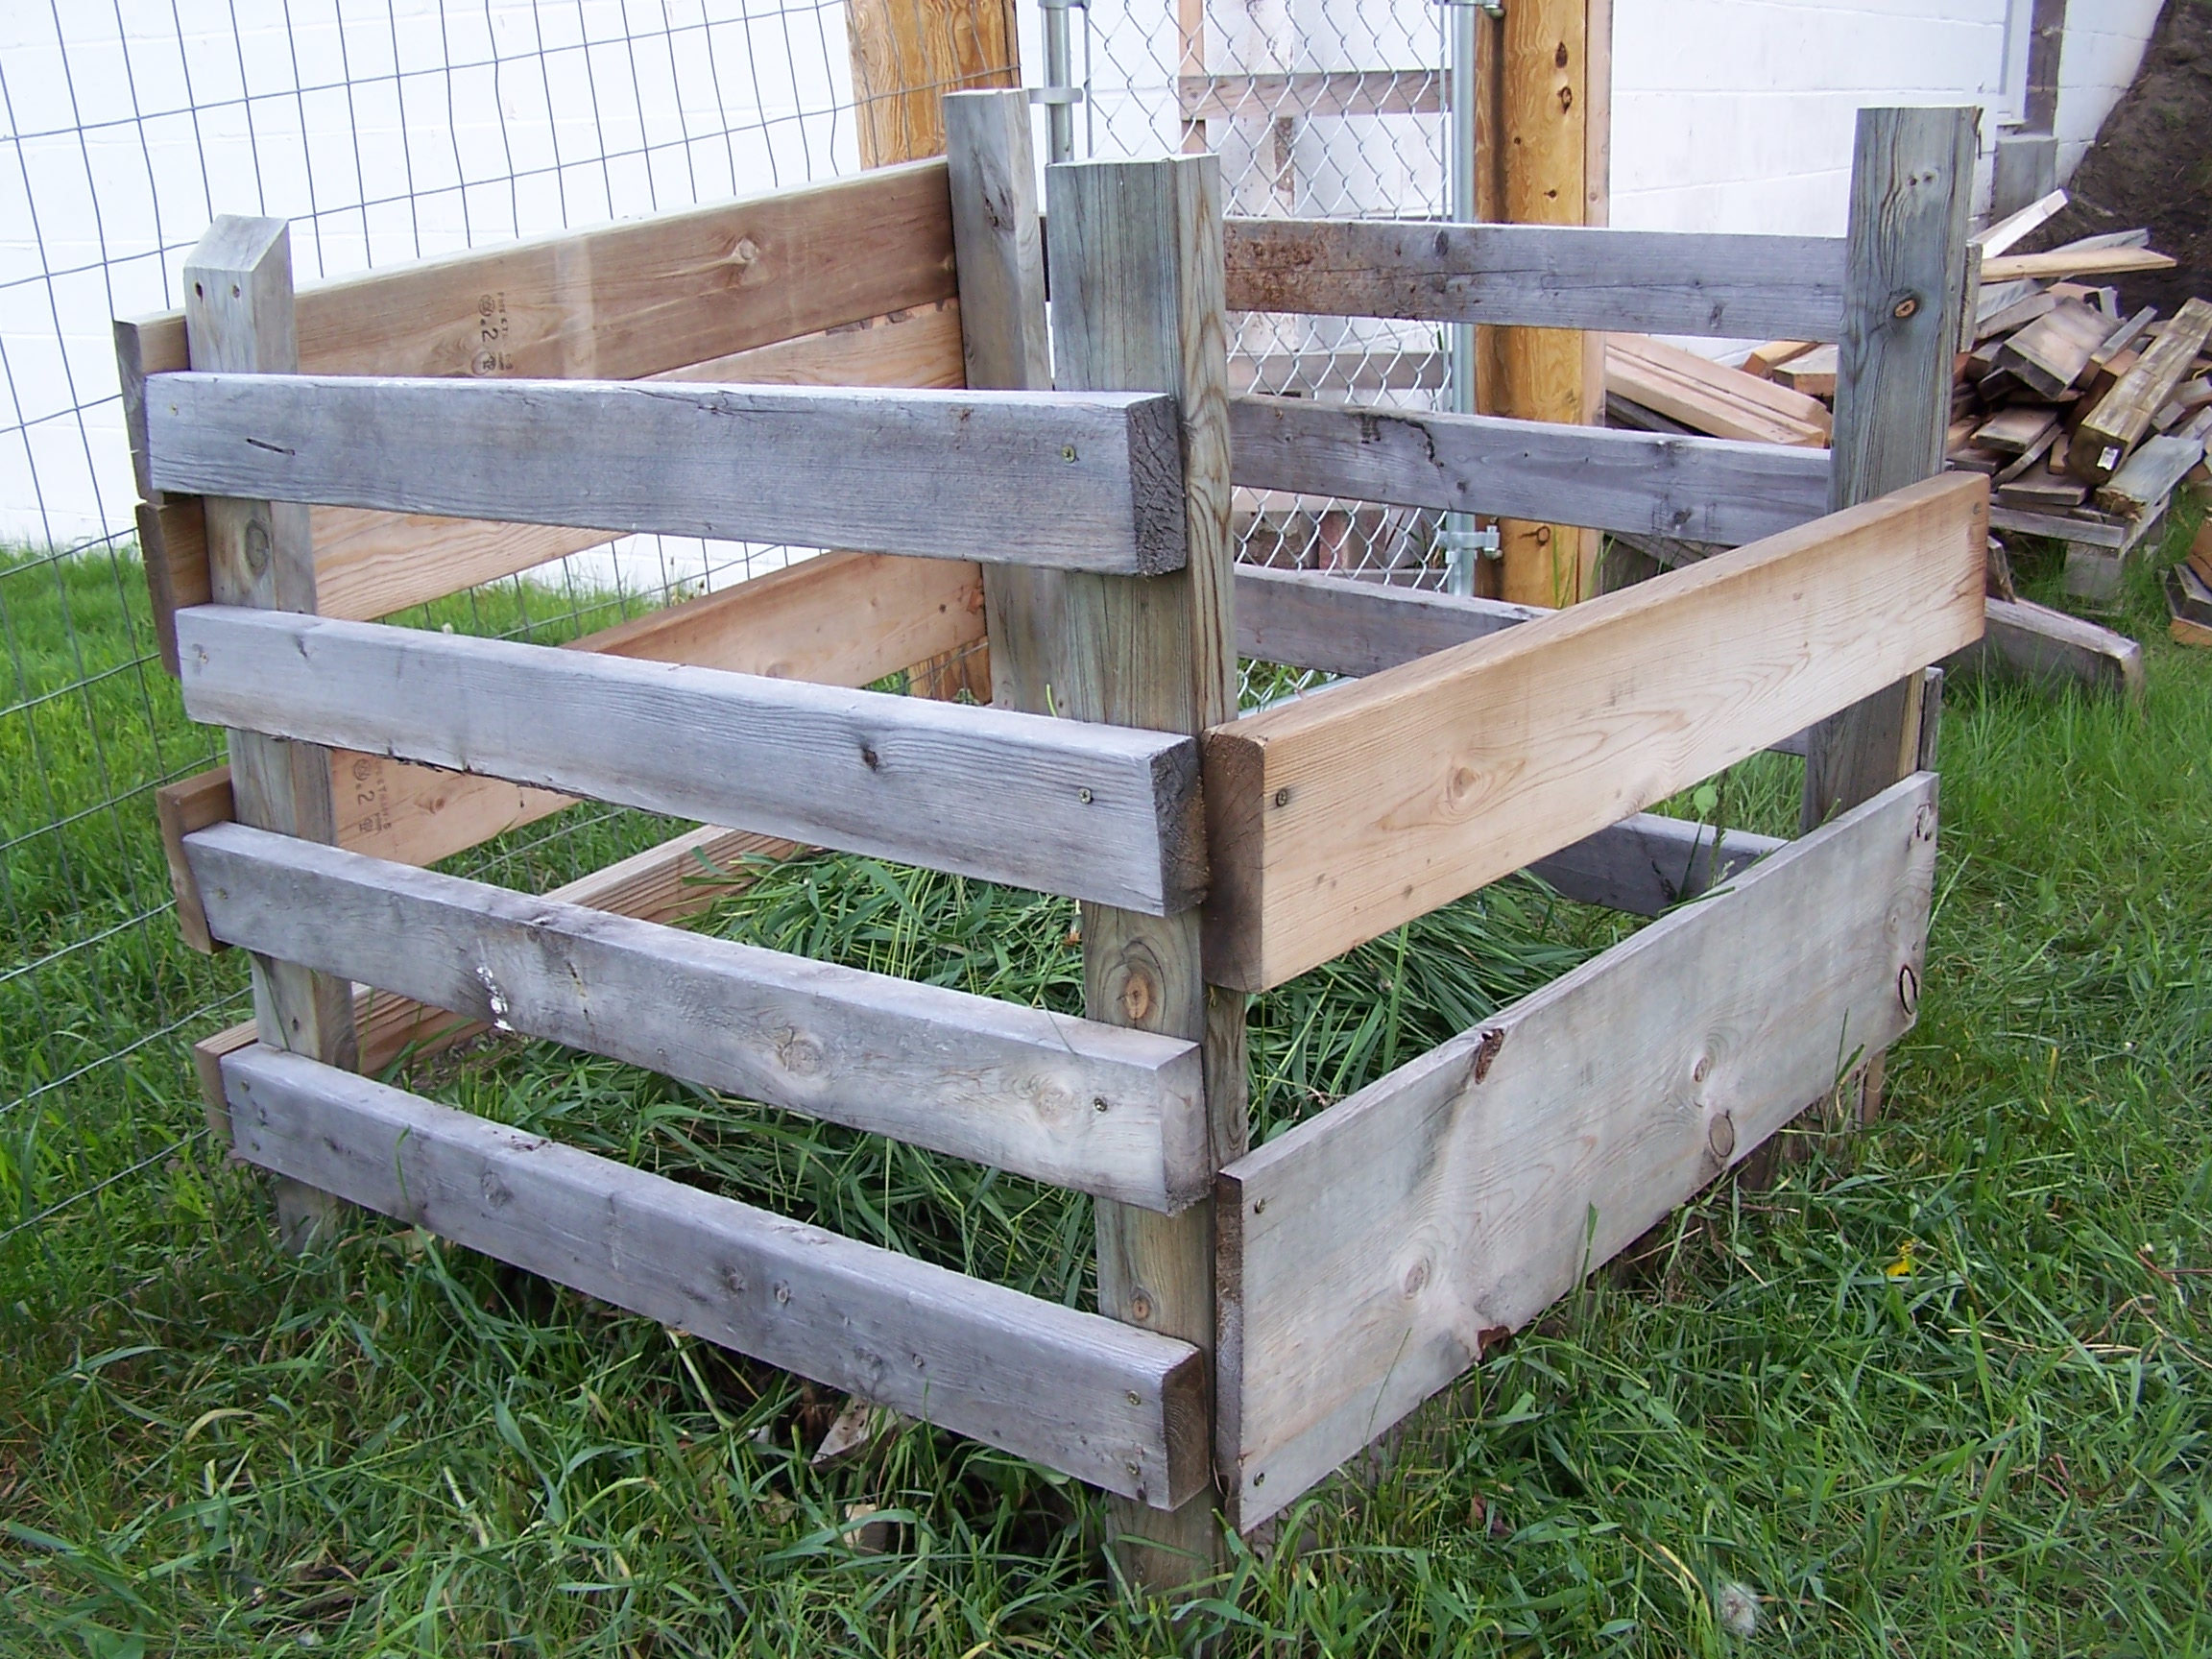 Homemade Compost Bin wood projects pictures DIY PDF Plans 